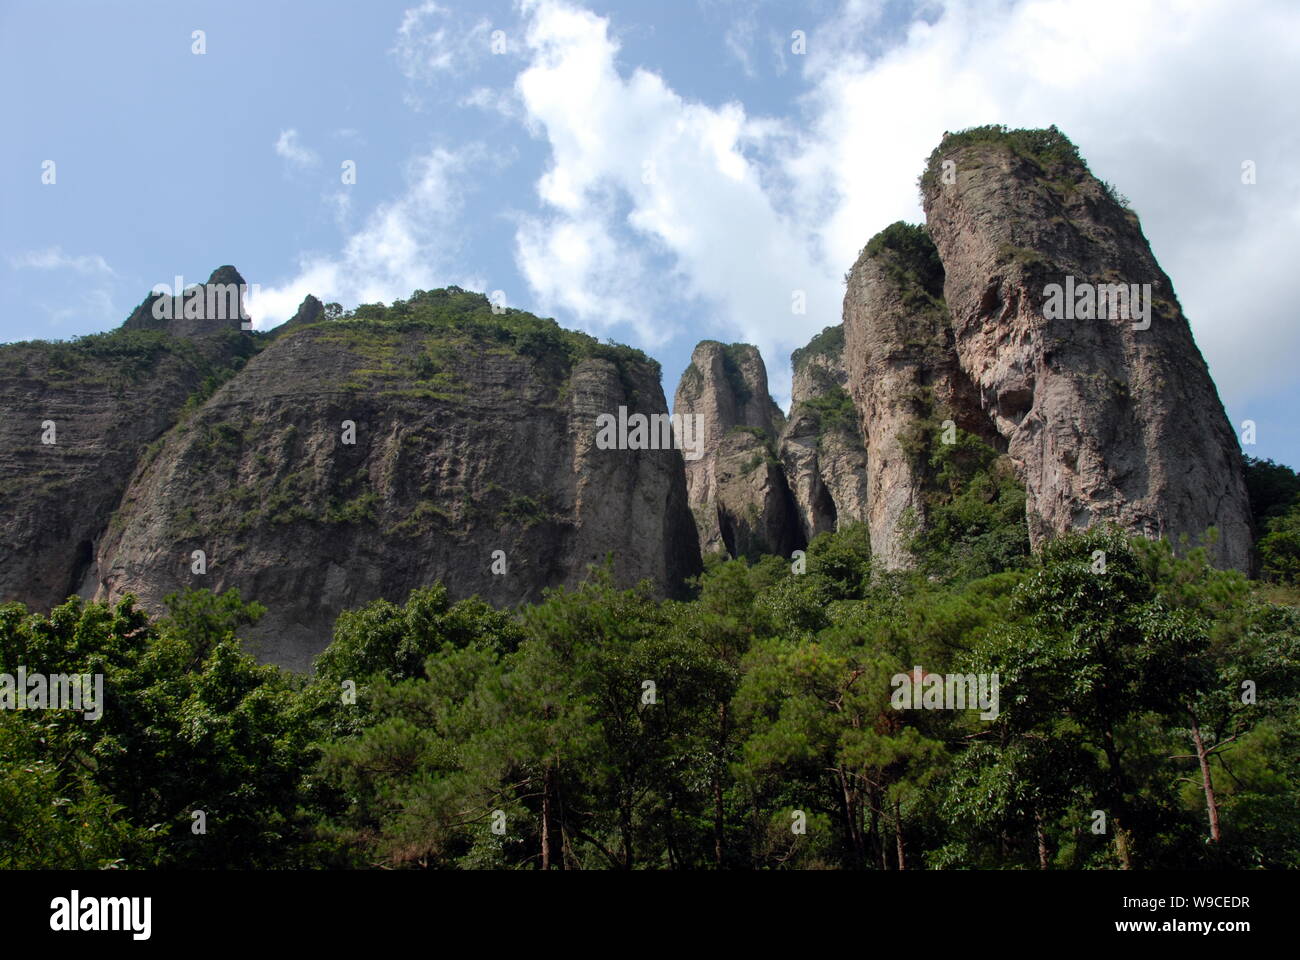 Landscape of the Yandang Mountain senic spot in Wenzhou city, east ...